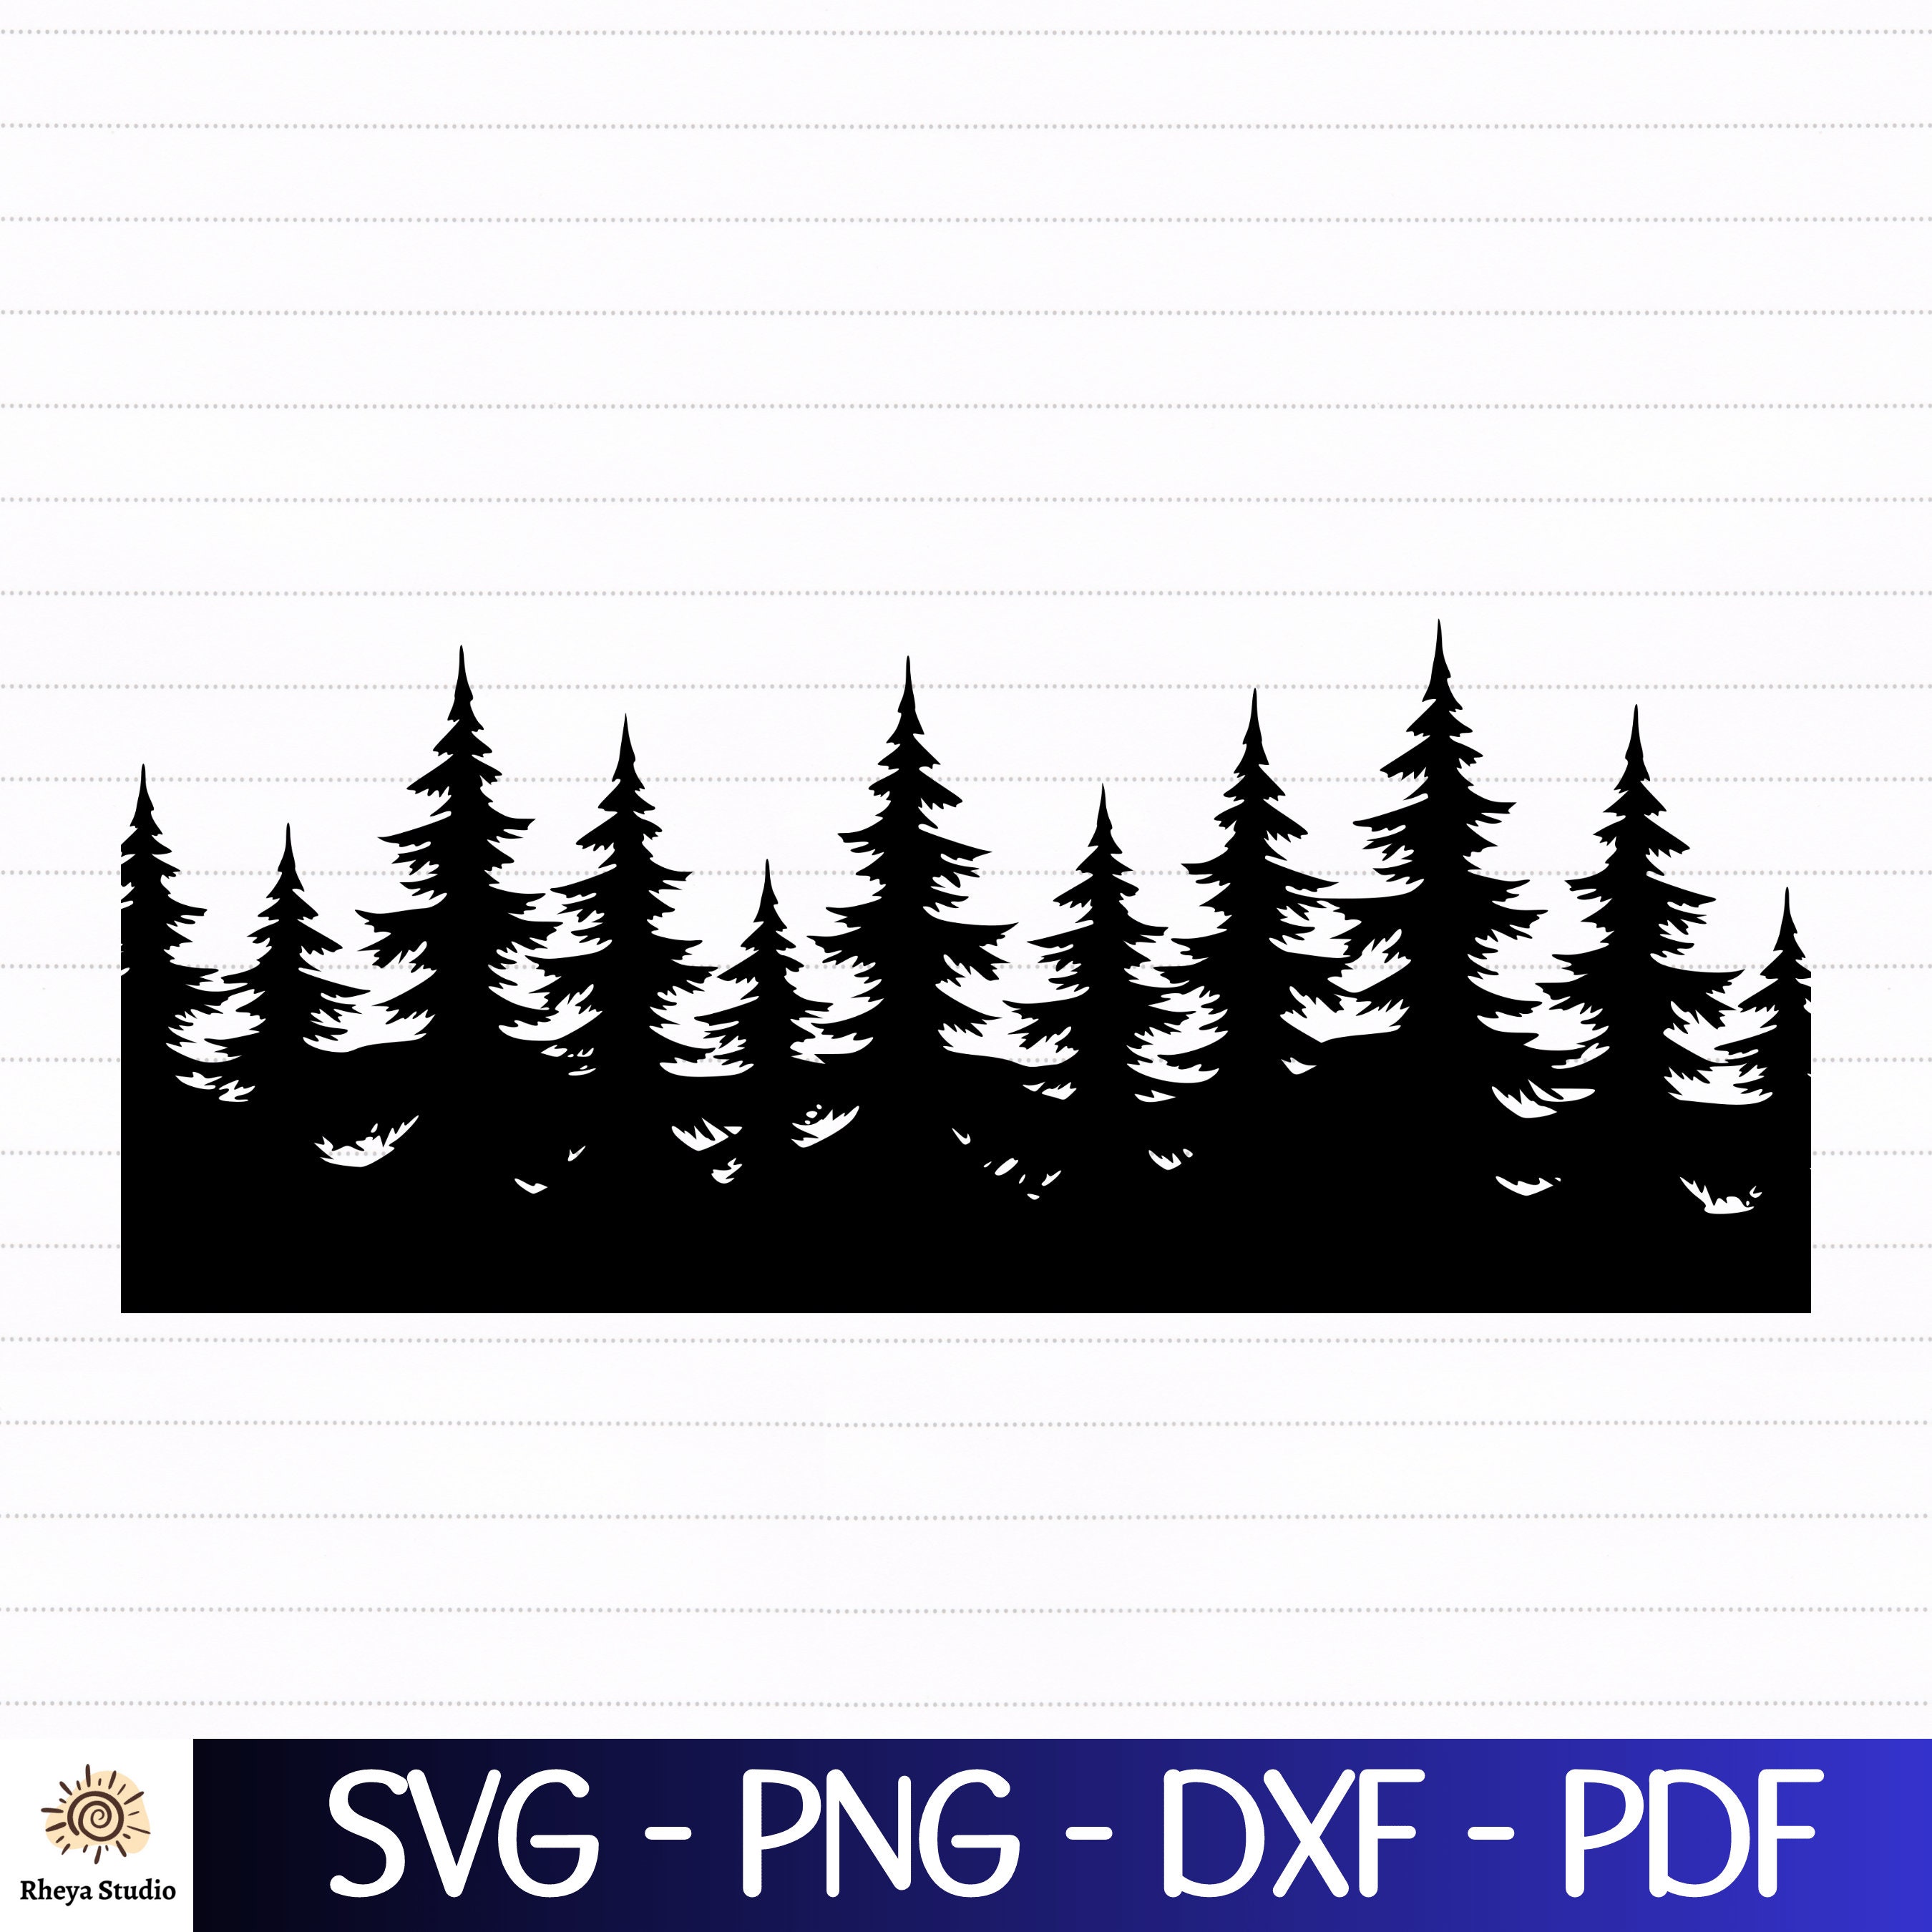 Treeline Forest SVG Graphic by zeecool.jy · Creative Fabrica